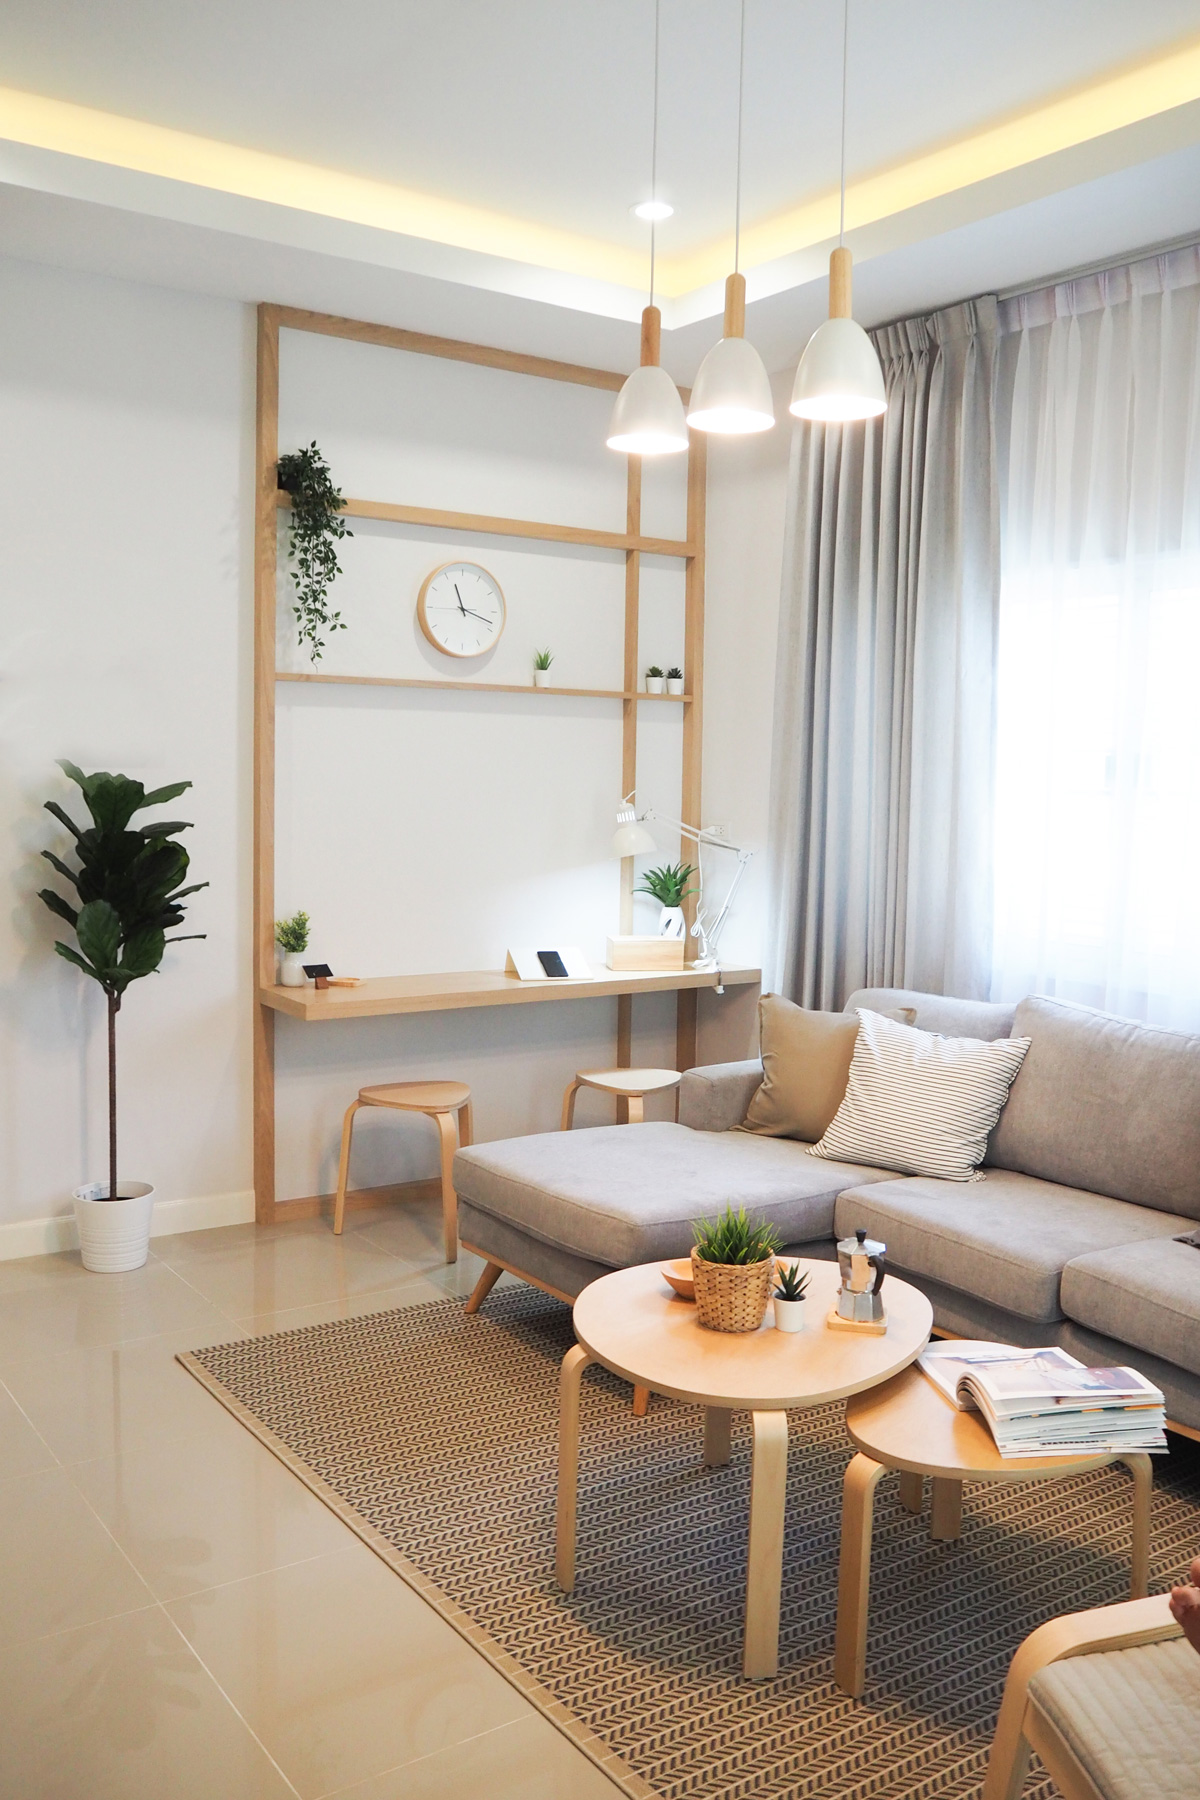 ivingroom area white and light wood tone interior house japanese style